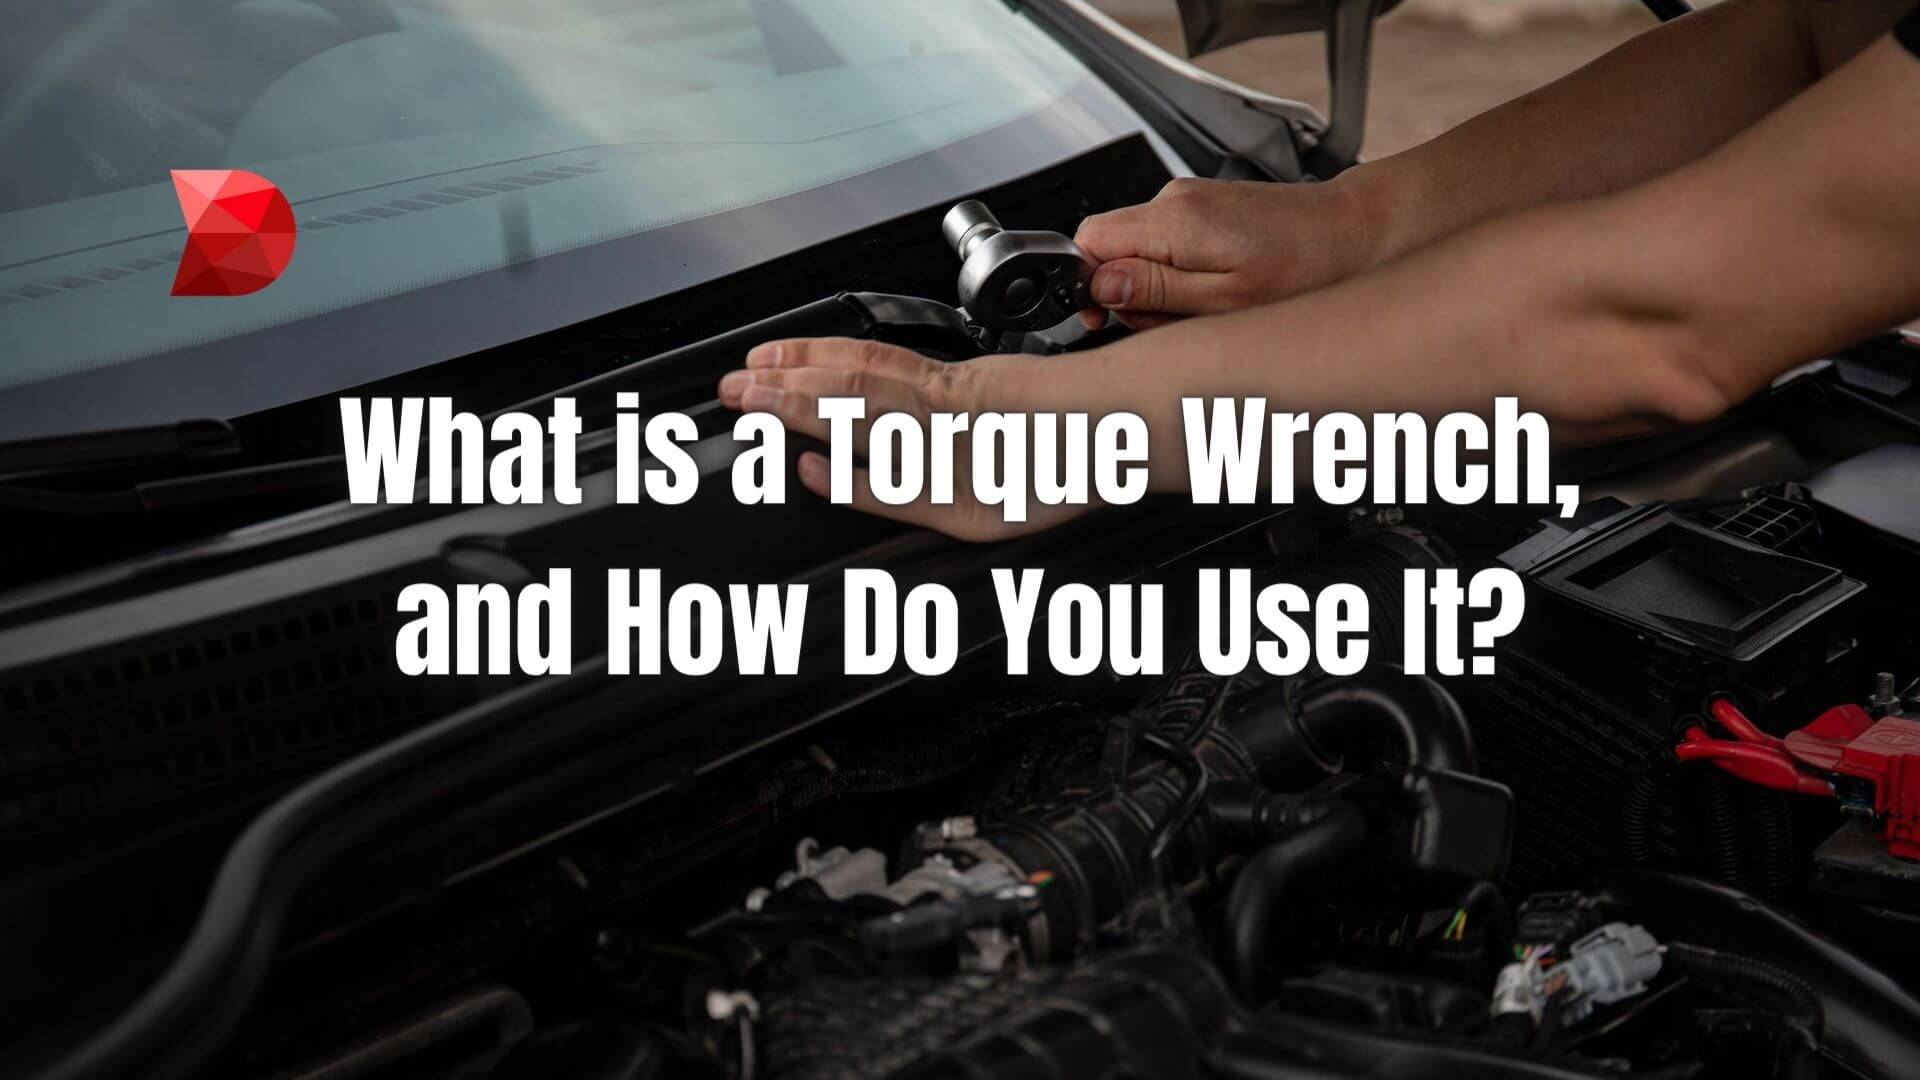 How to Properly Use Torque Wrench